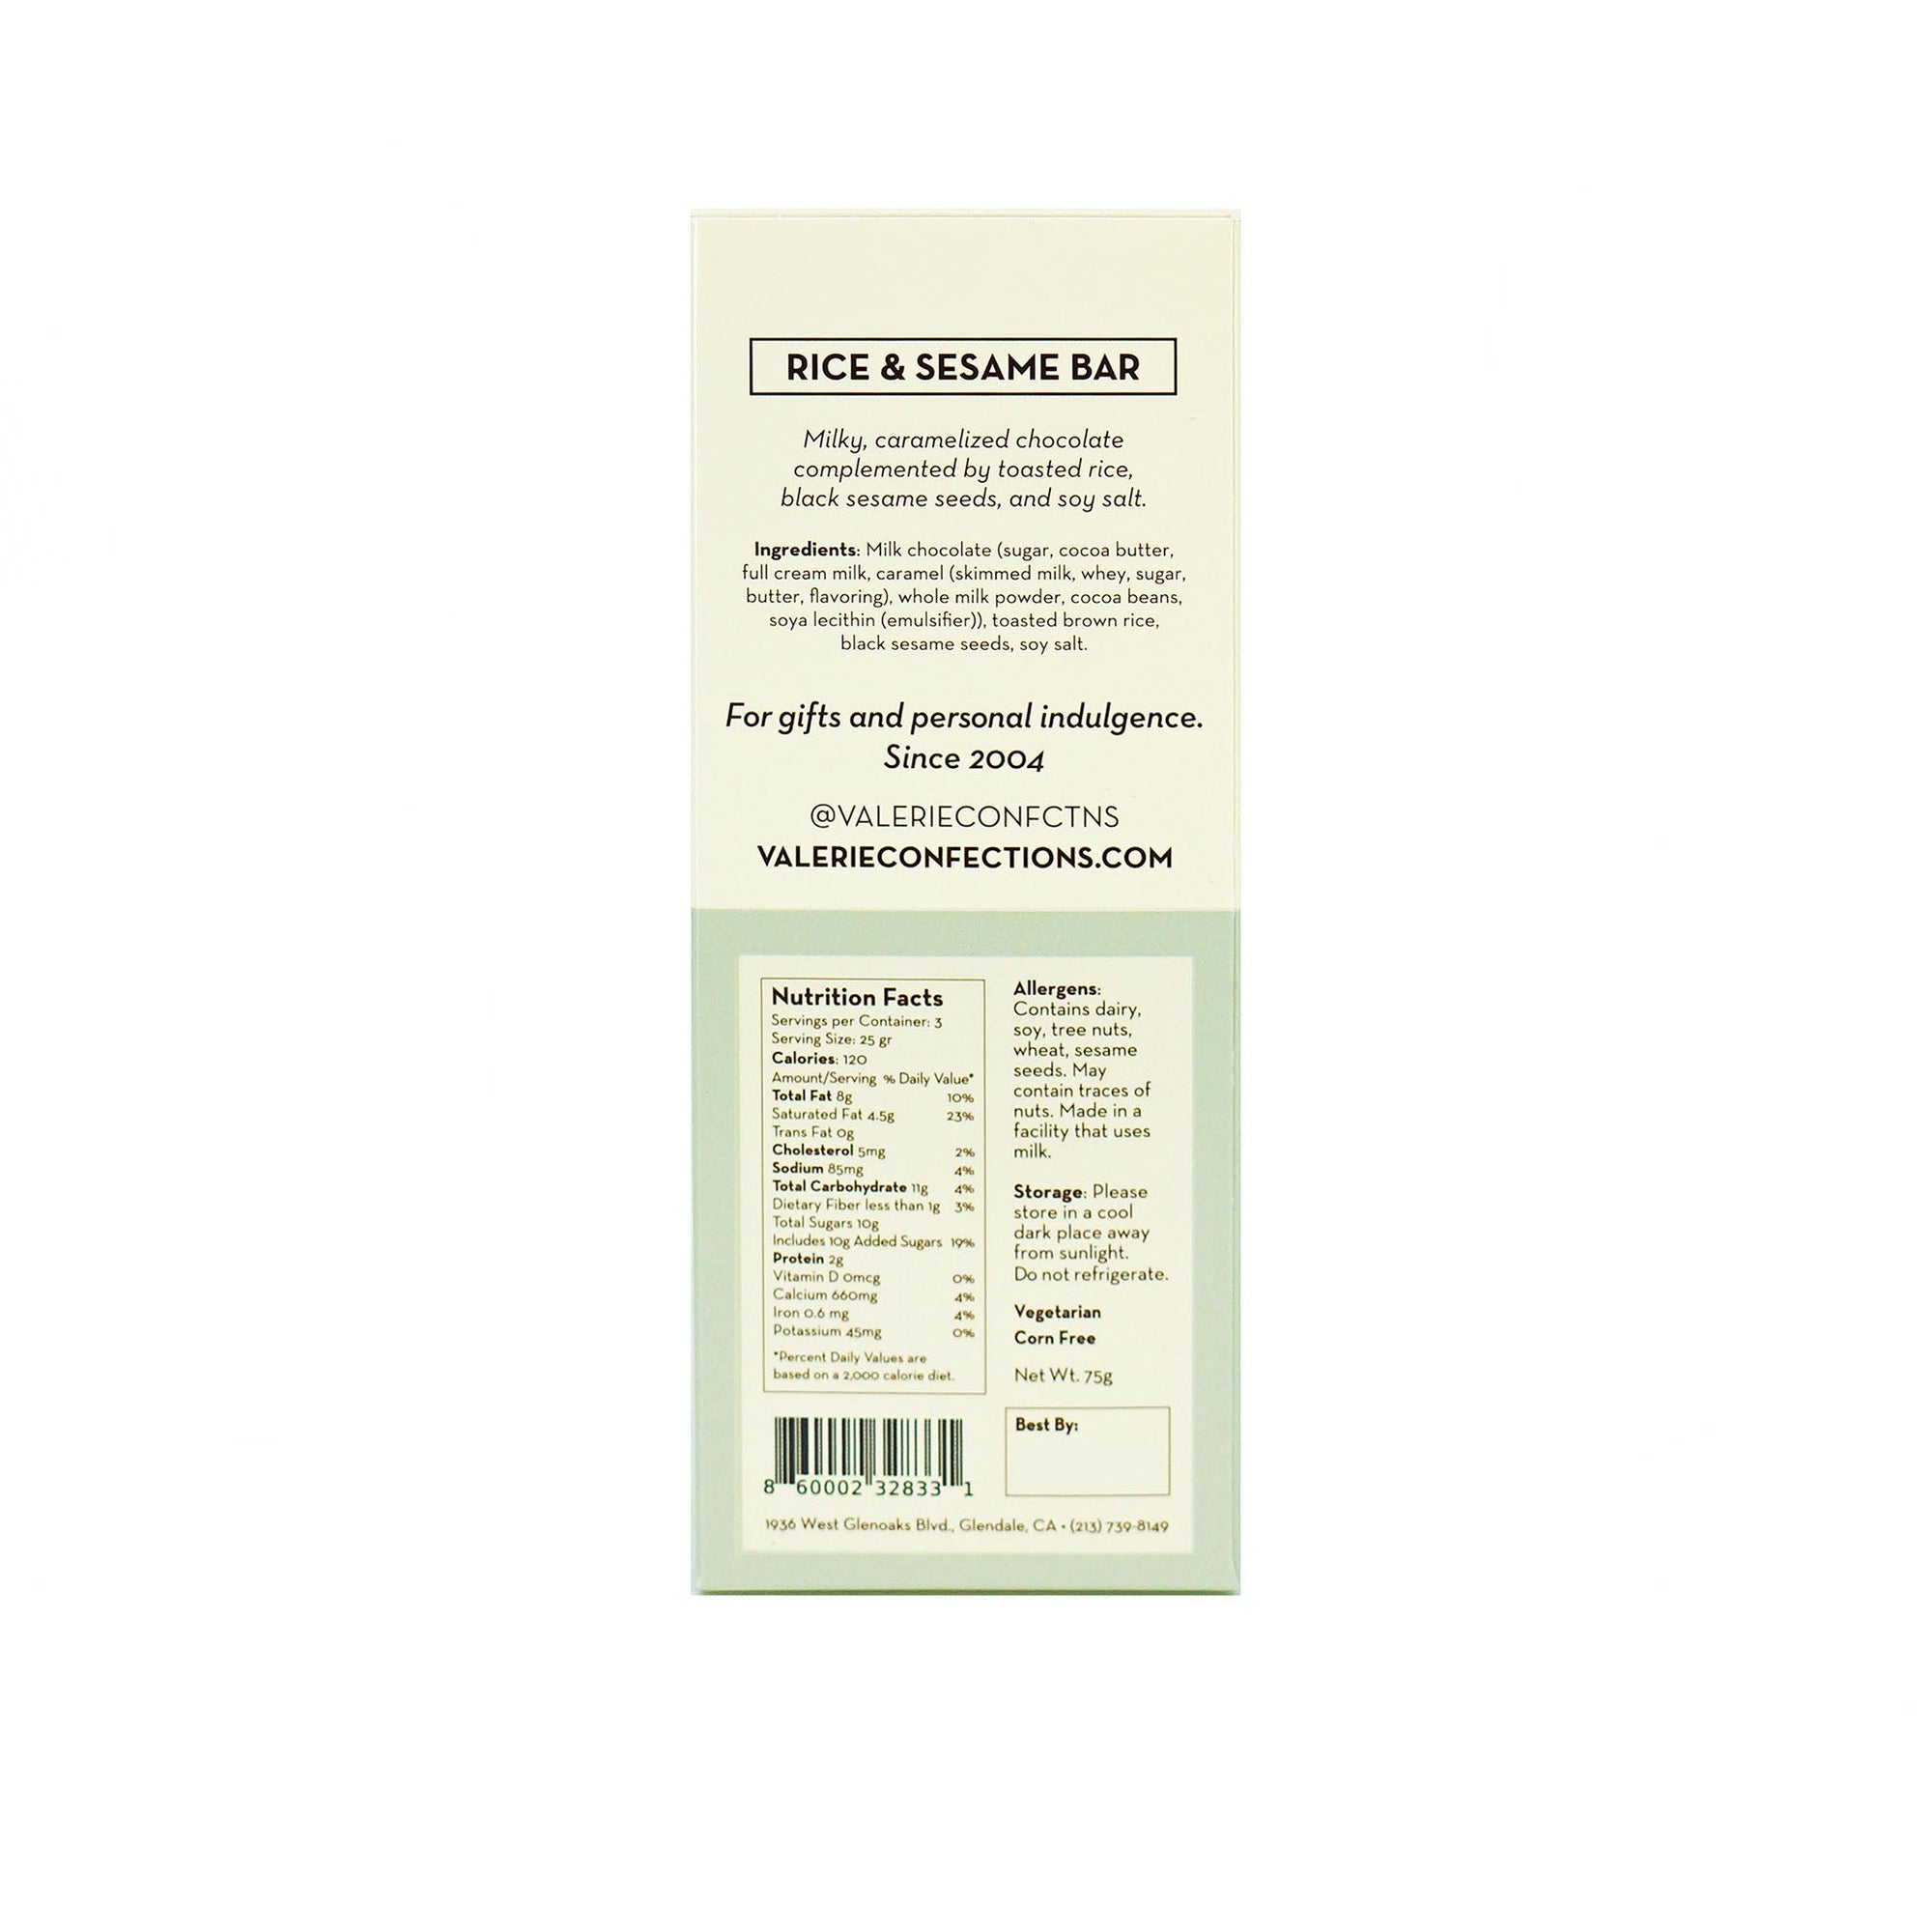 Back side of a "Rice & Sesame Bar" packaging with product details, ingredients, nutrition facts, allergens, and storage instructions.